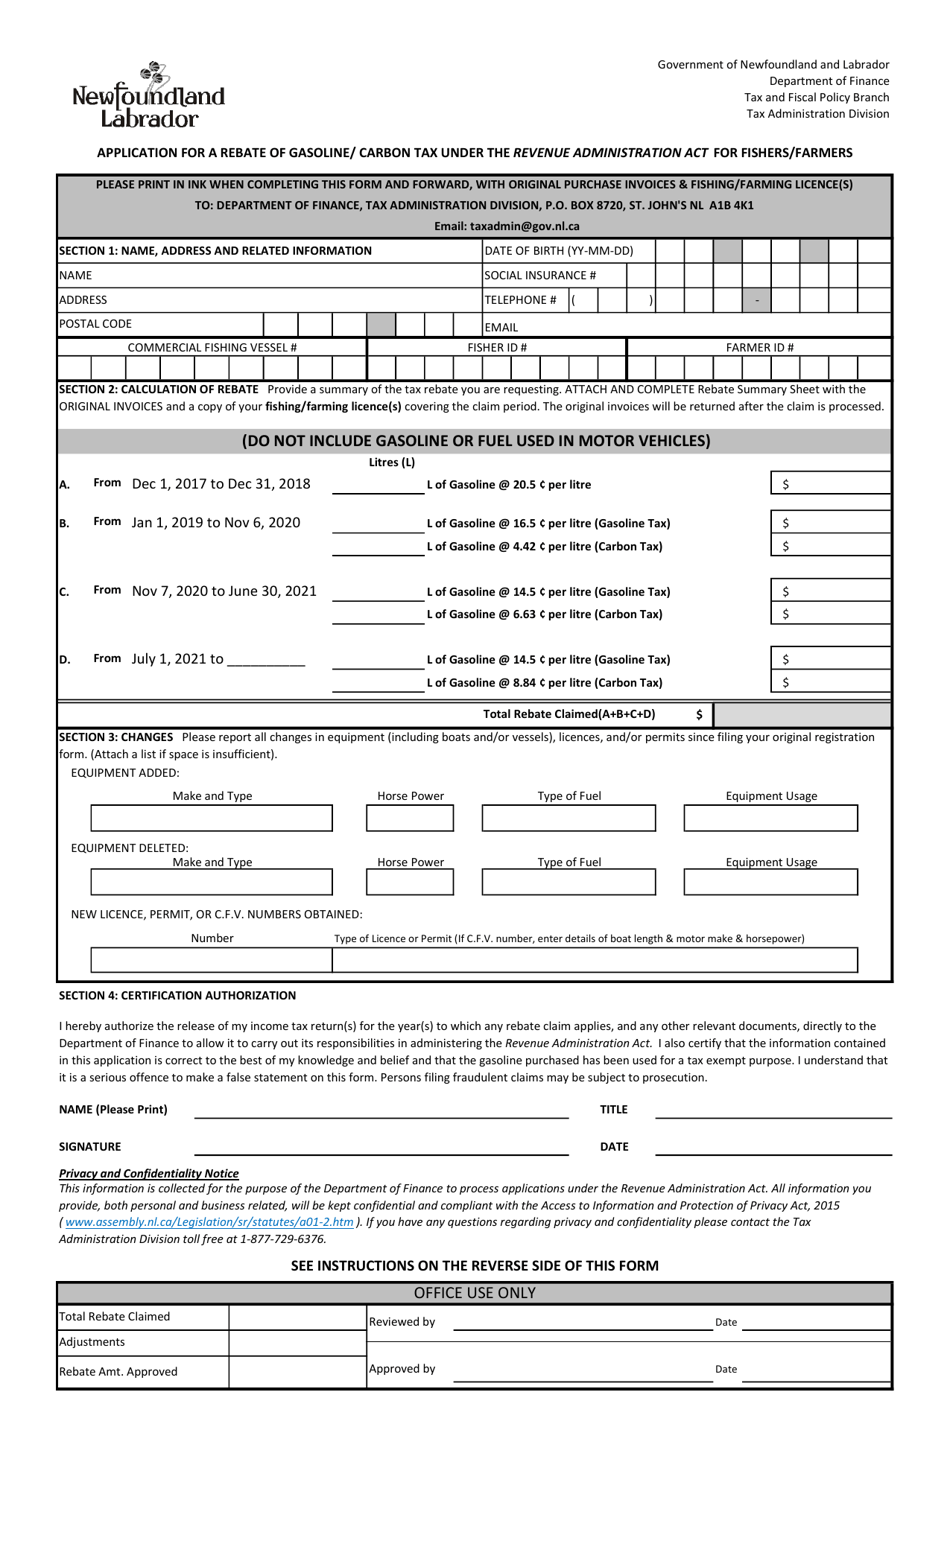 Application for a Rebate of Gasoline / Carbon Tax Under the Revenue Administration Act for Fishers / Farmers - Newfoundland and Labrador, Canada, Page 1